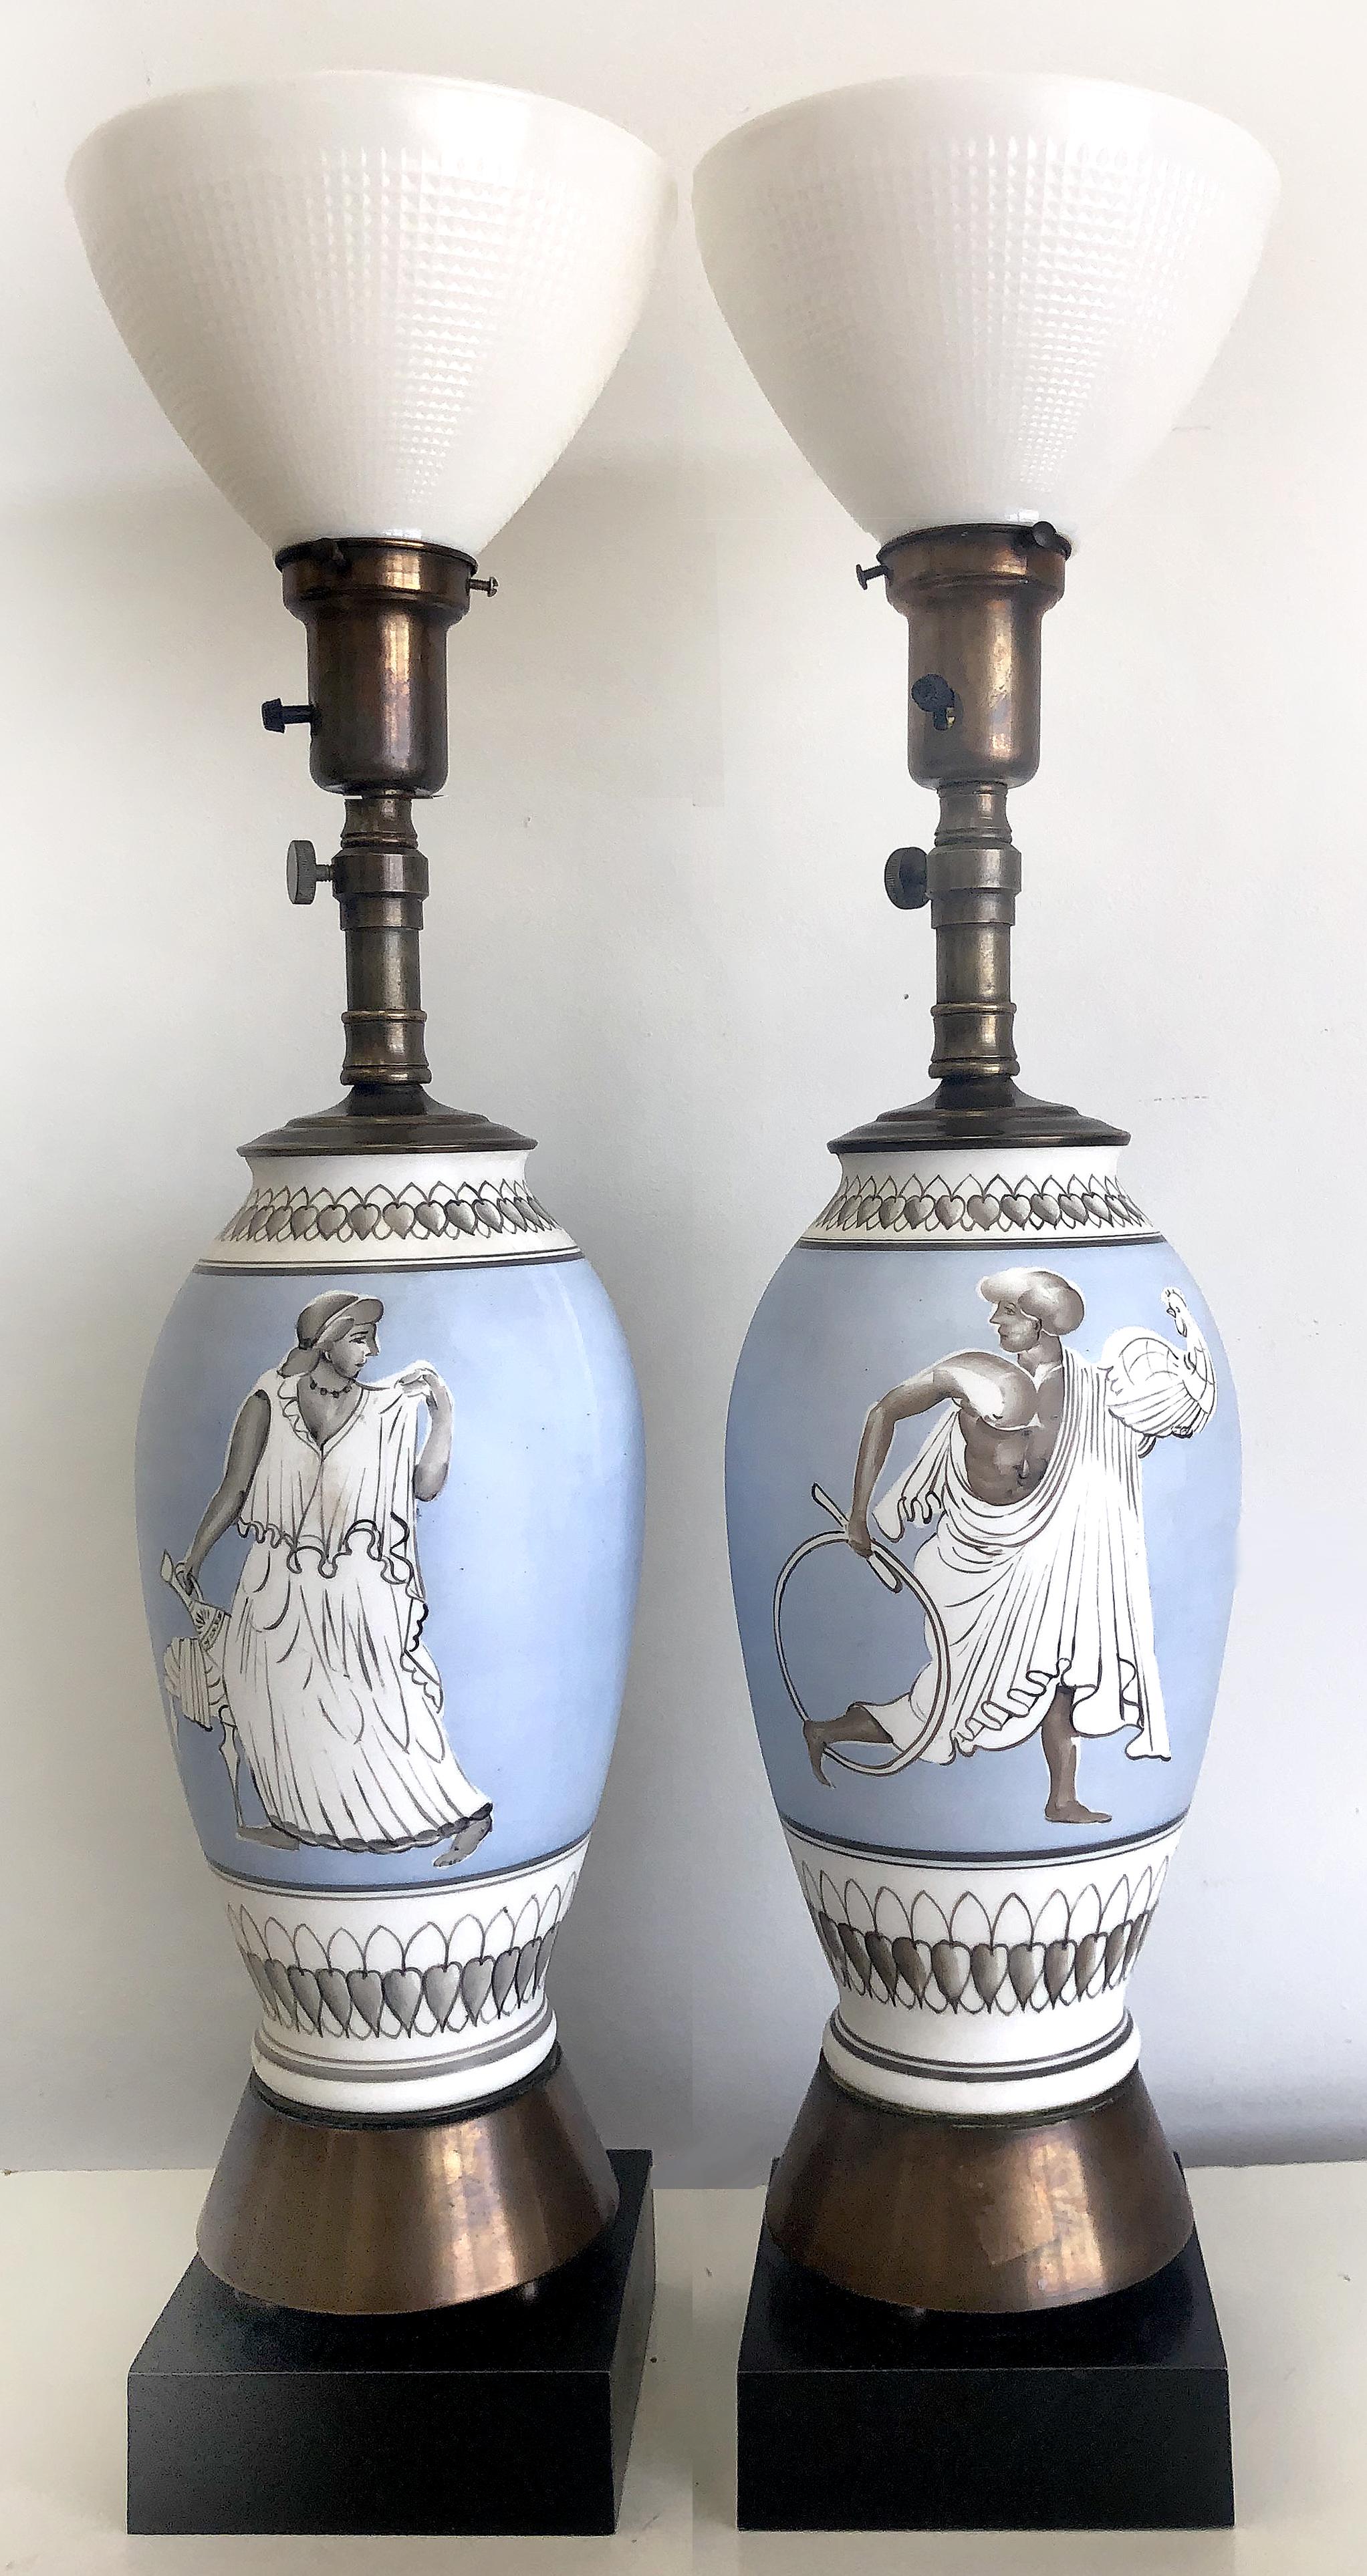 Vintage figural porcelain table lamps


Offered for sale is a vintage pair of vintage elegant hand-painted porcelain lamps.
Each lamp depicts an evocative image of ancient Roman male and female figures. The lamps are supported by brass bases upon